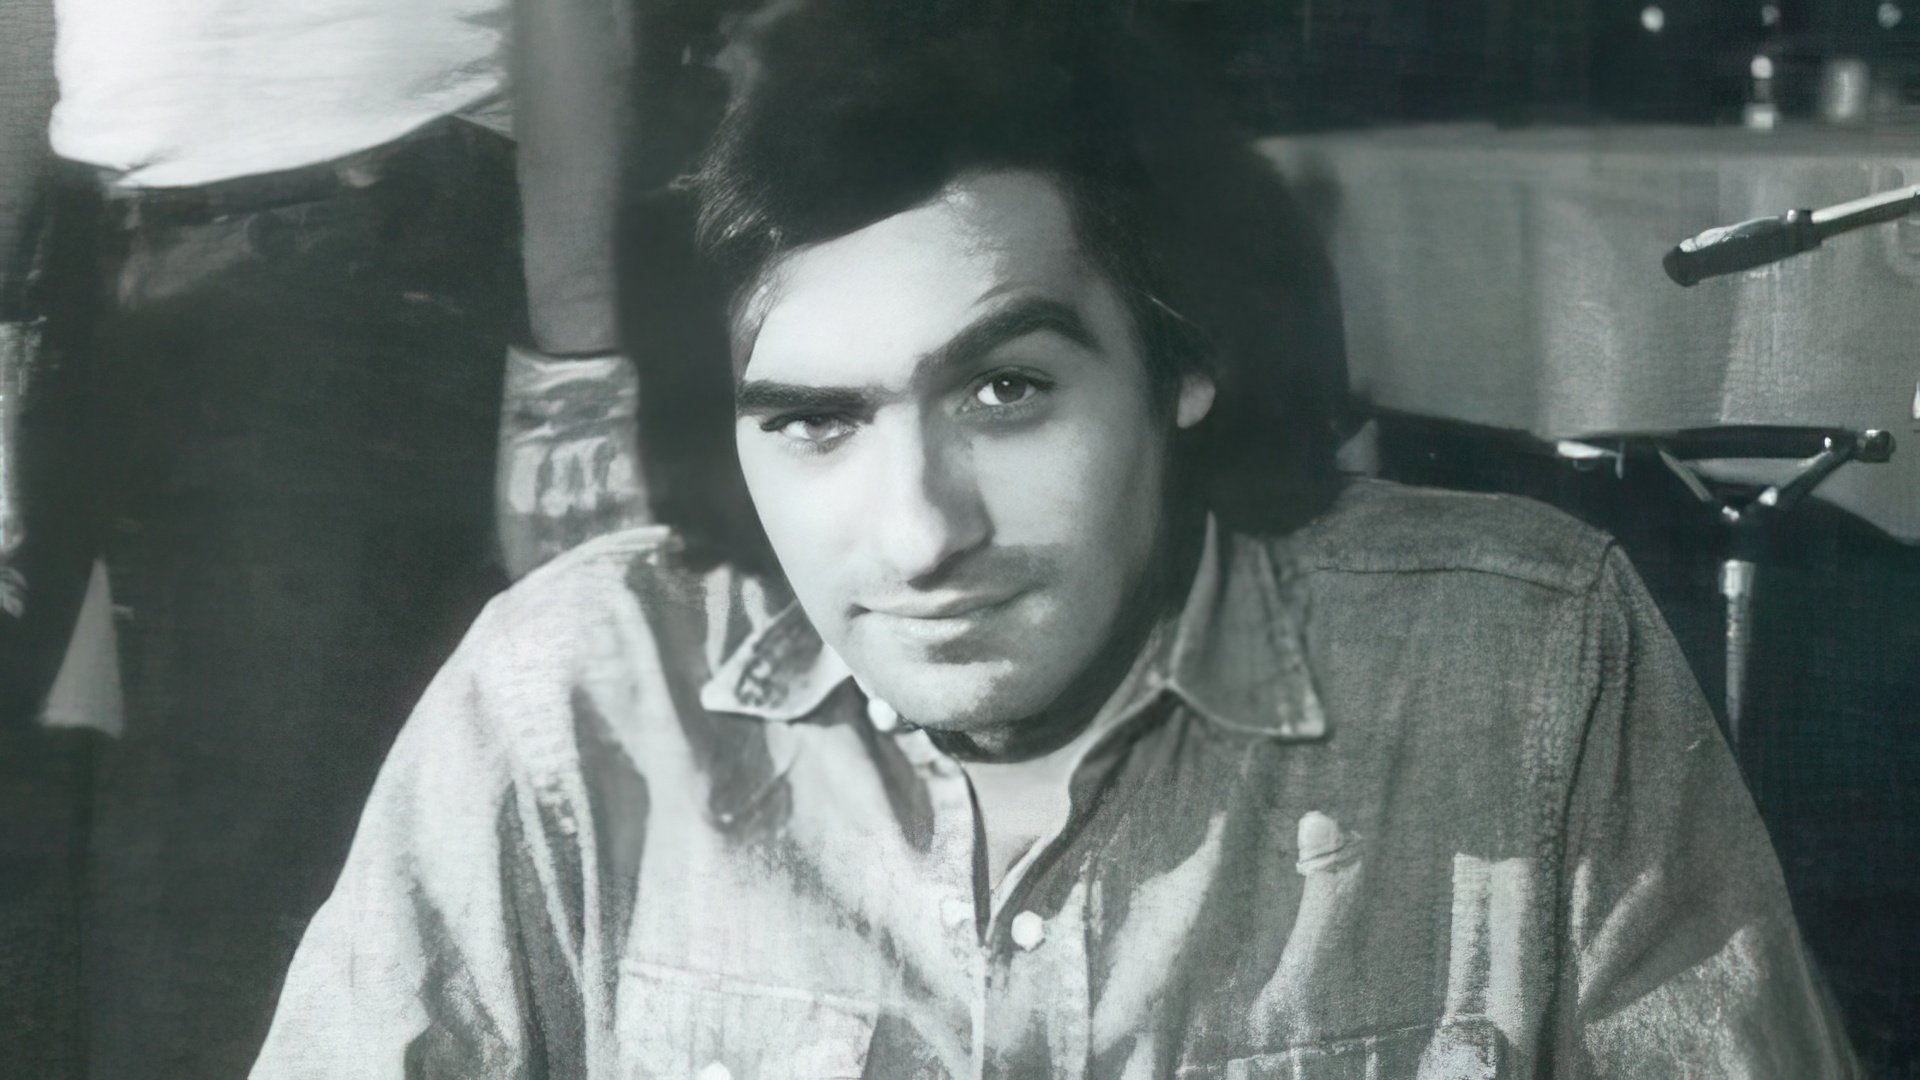 Martin Scorsese in his youth